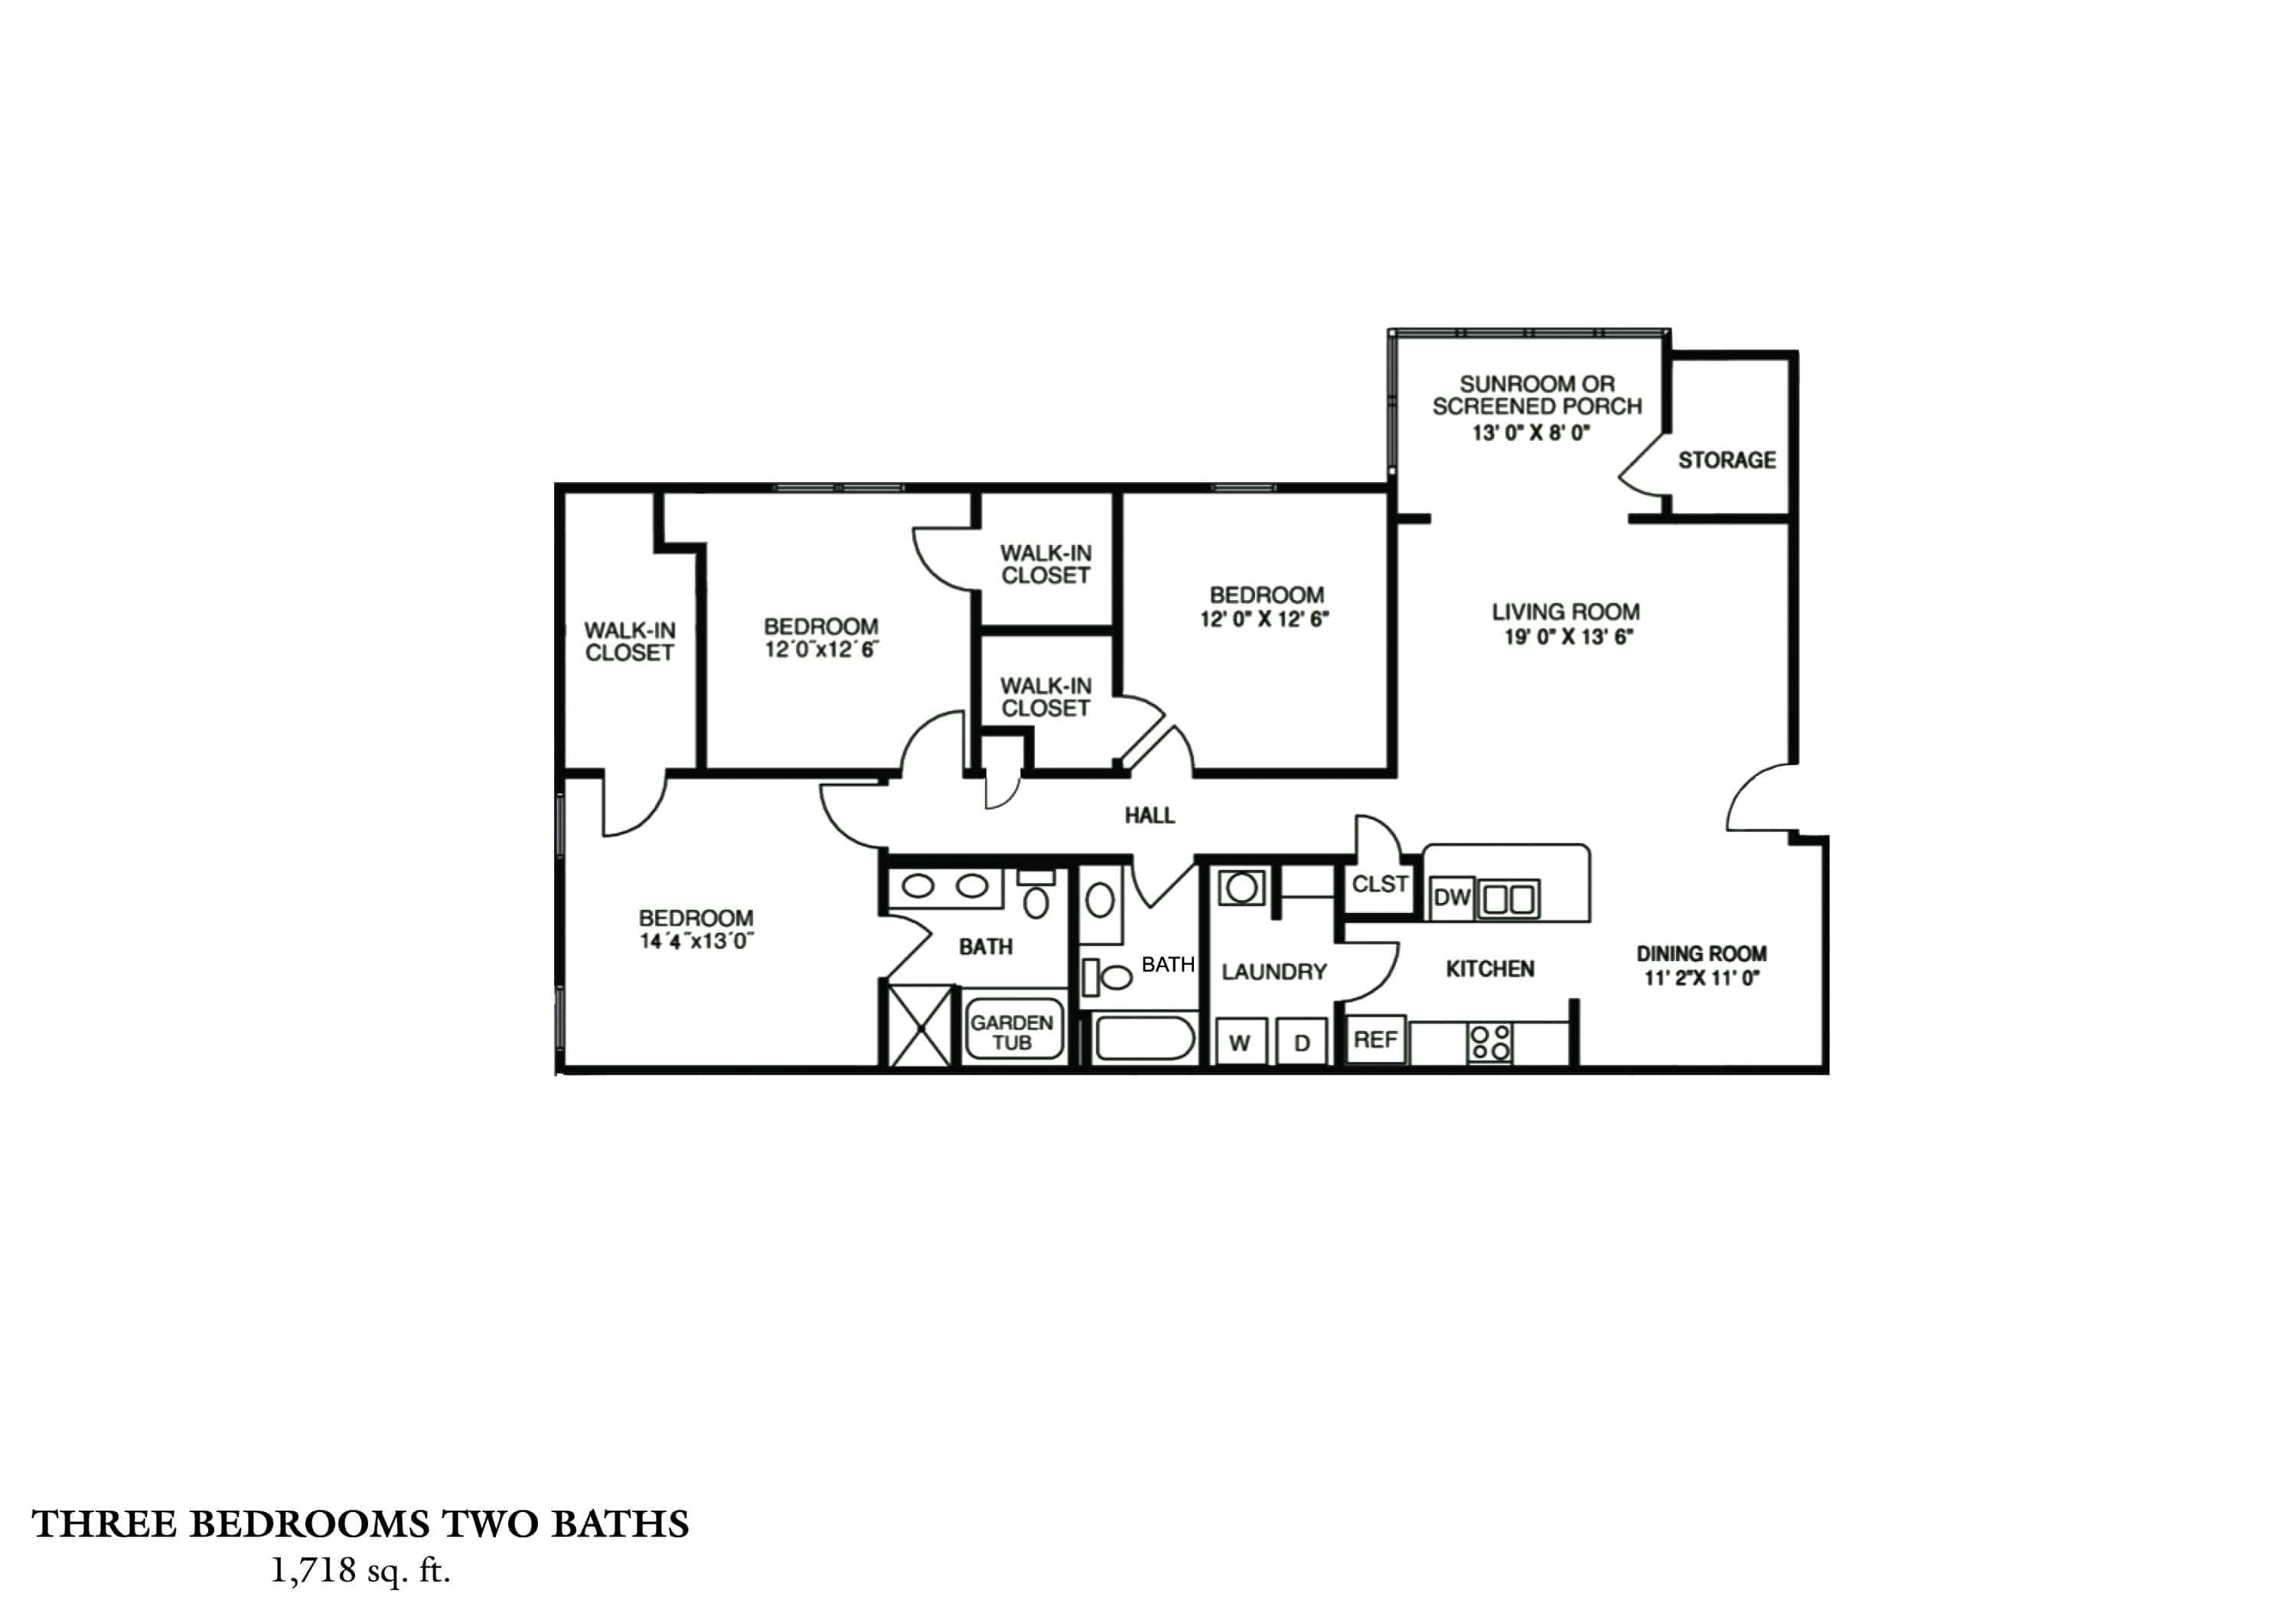 Greystone Properties Columbus, GA Apartments Three Bedroom - PHASE I & PHASE II Approx. 1,718 sq. ft. Beds 2 Baths 2